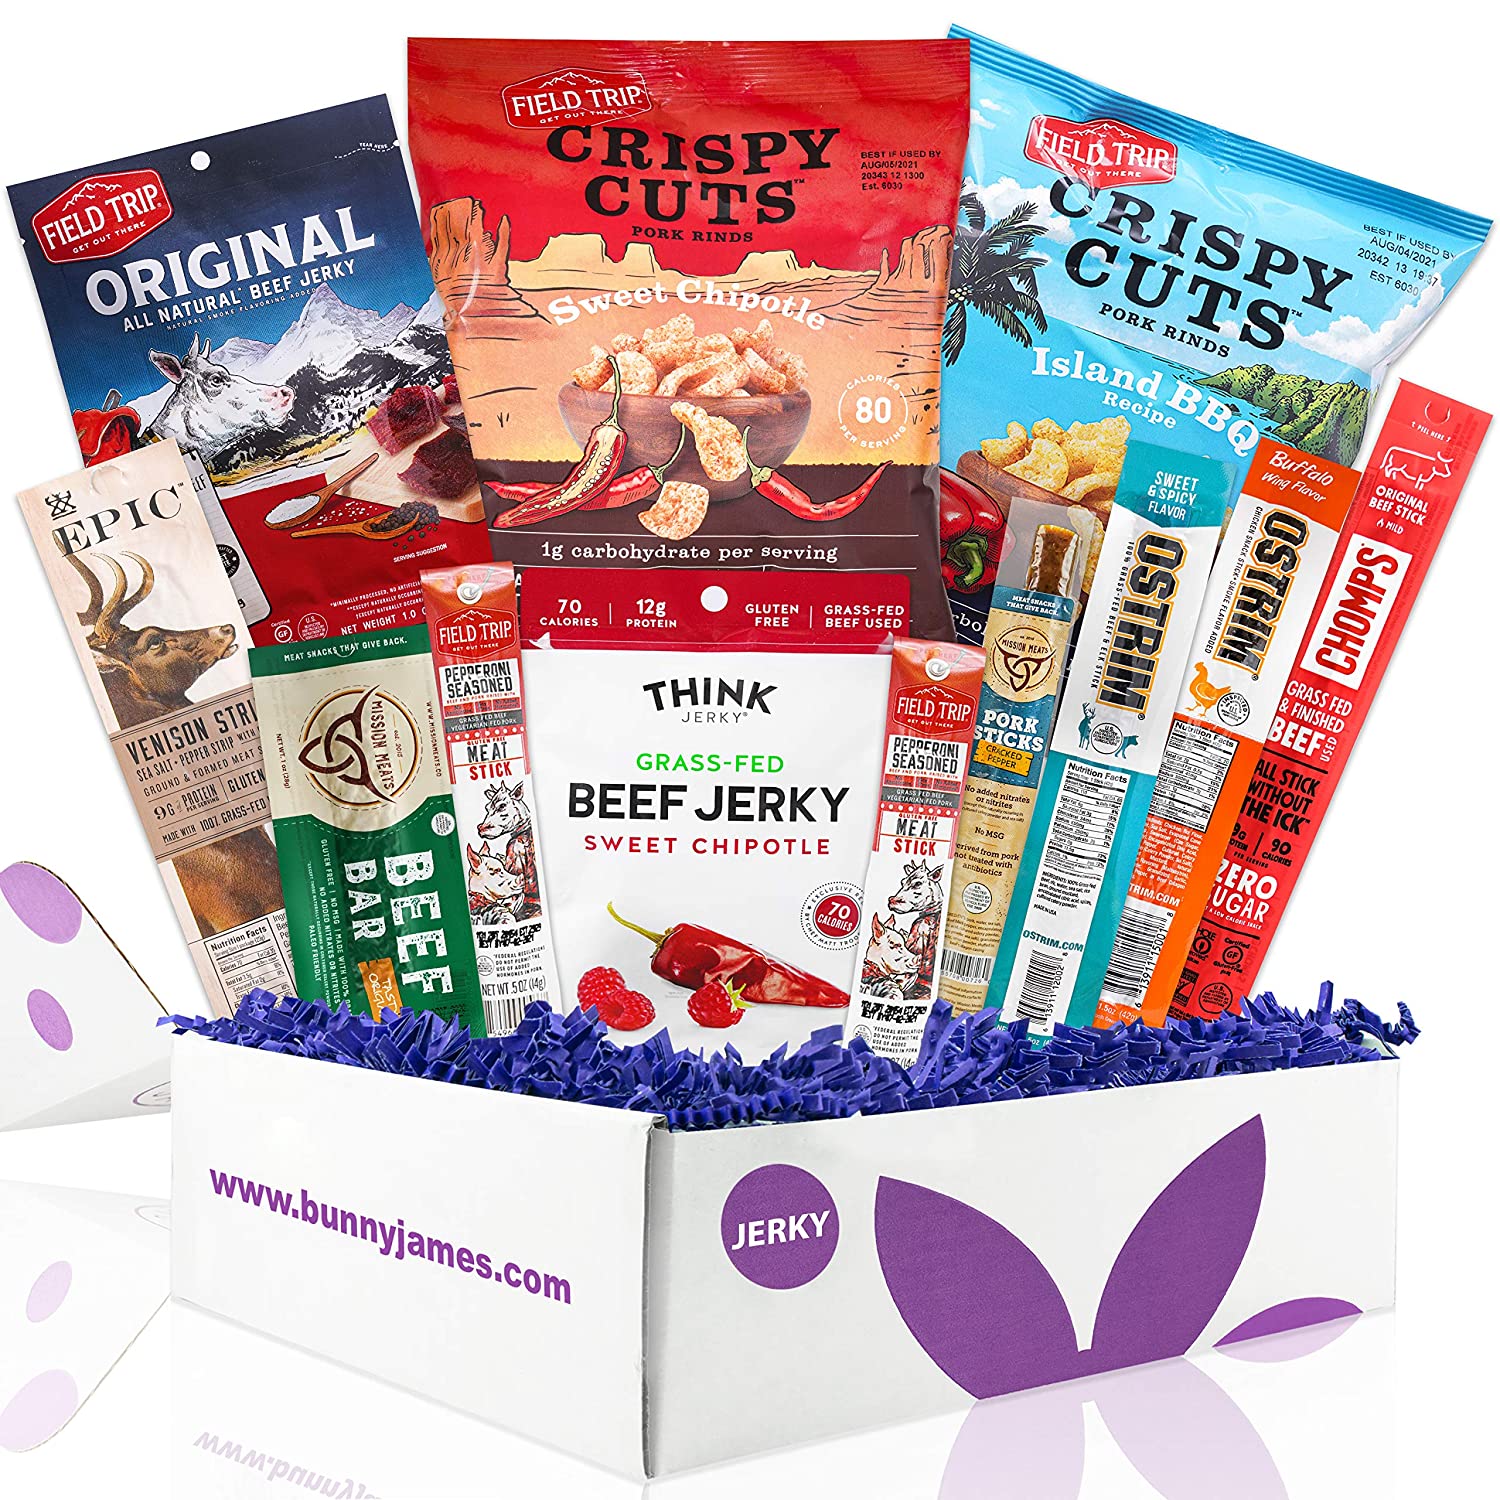 Beef Jerky Gifts For Men: Variety Of Healthy Beef Meat Sticks, Pork Rinds, Exotic Jerky, Epic Bars, Chomps Beef Sticks Perfect Beef Jerky Sampler Gift Box For Men